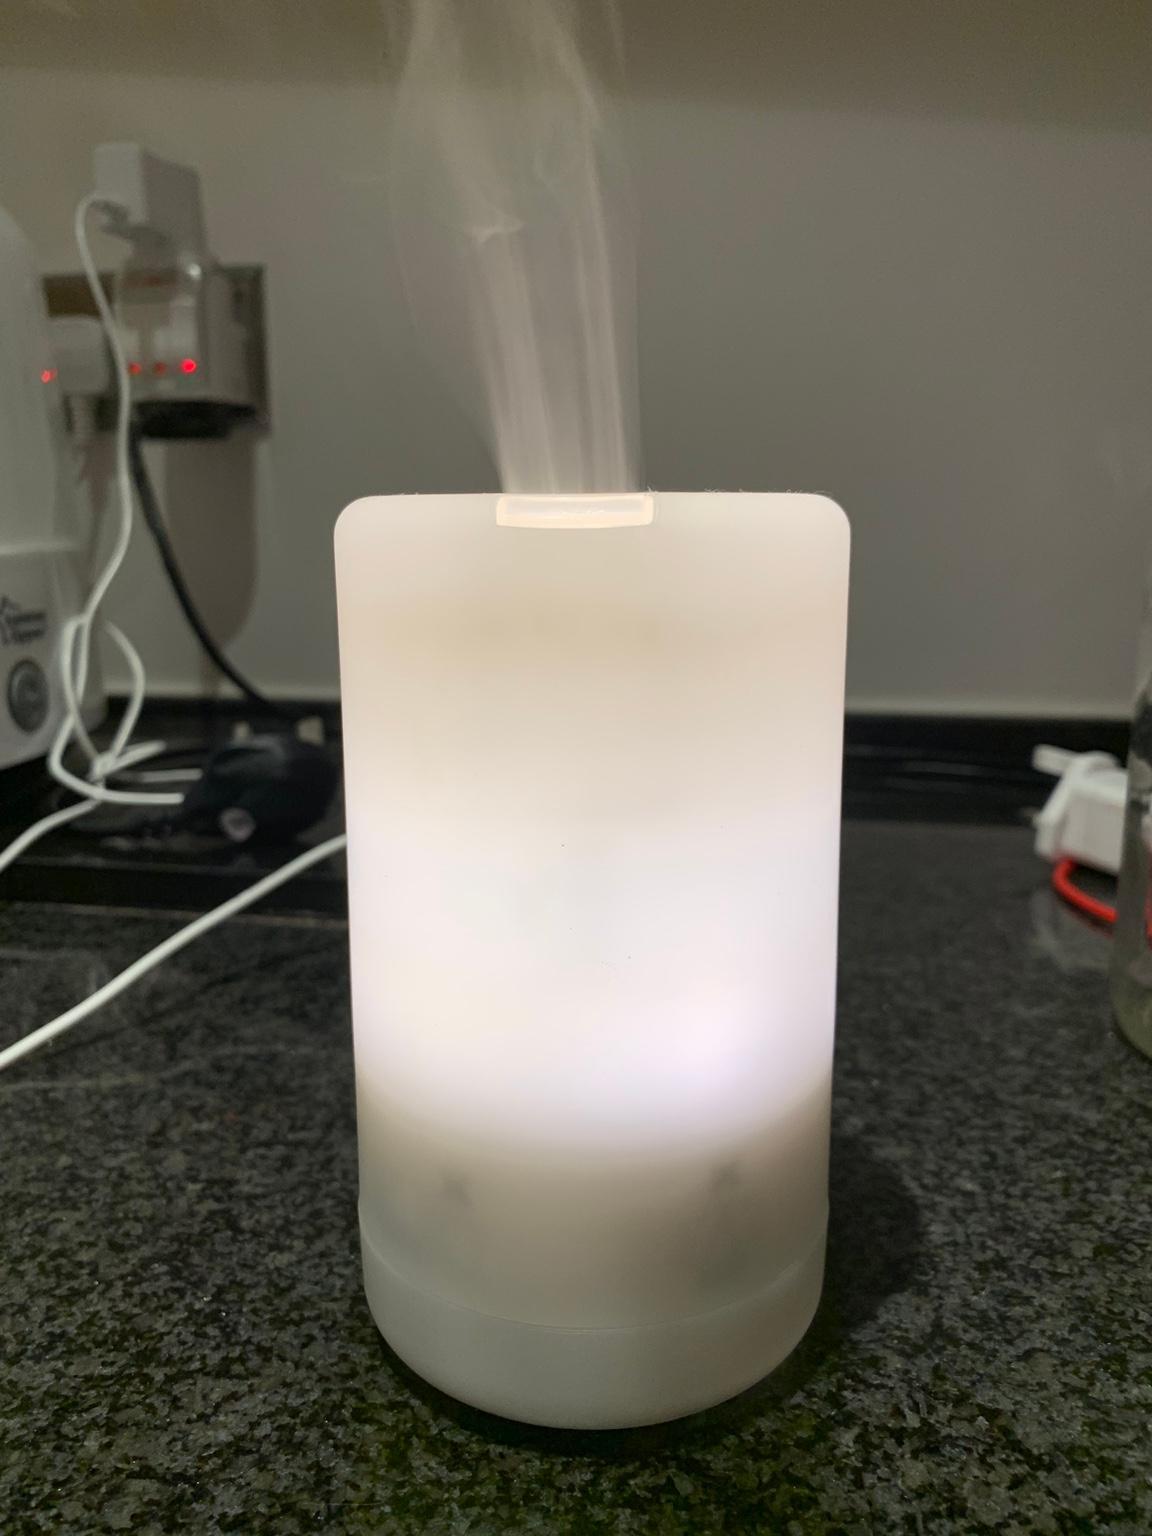 Muji Aroma Air Diffuser In Nw3 London For 20 00 For Sale Shpock